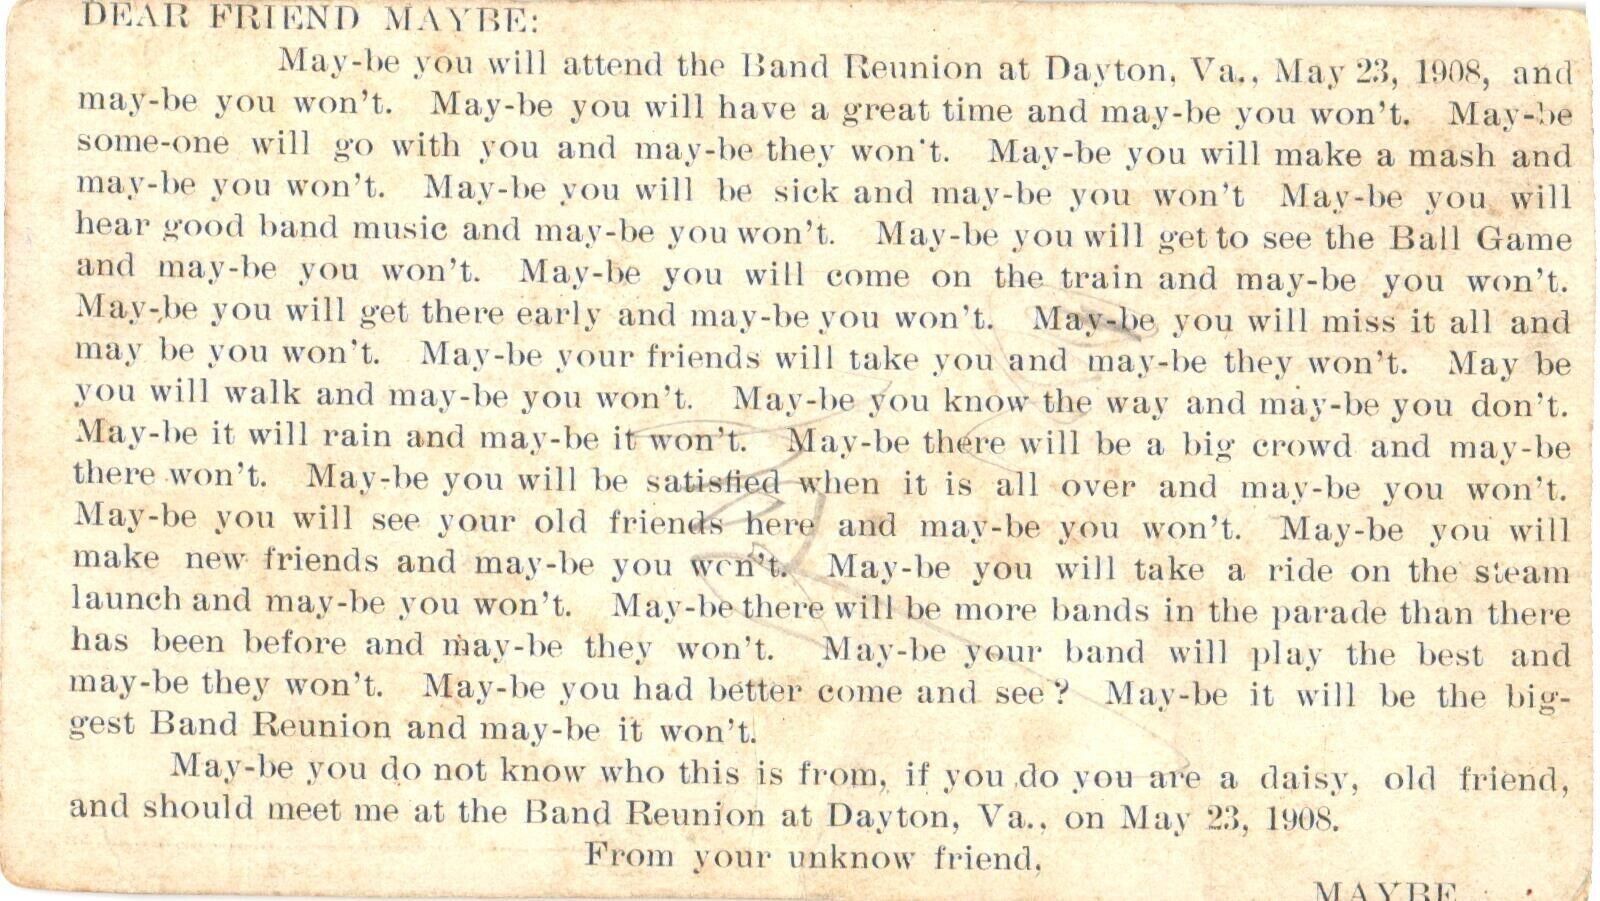 Dear Friend Maybe May-be You Will Attend Band Reunion at Dayton, Va., Postcard